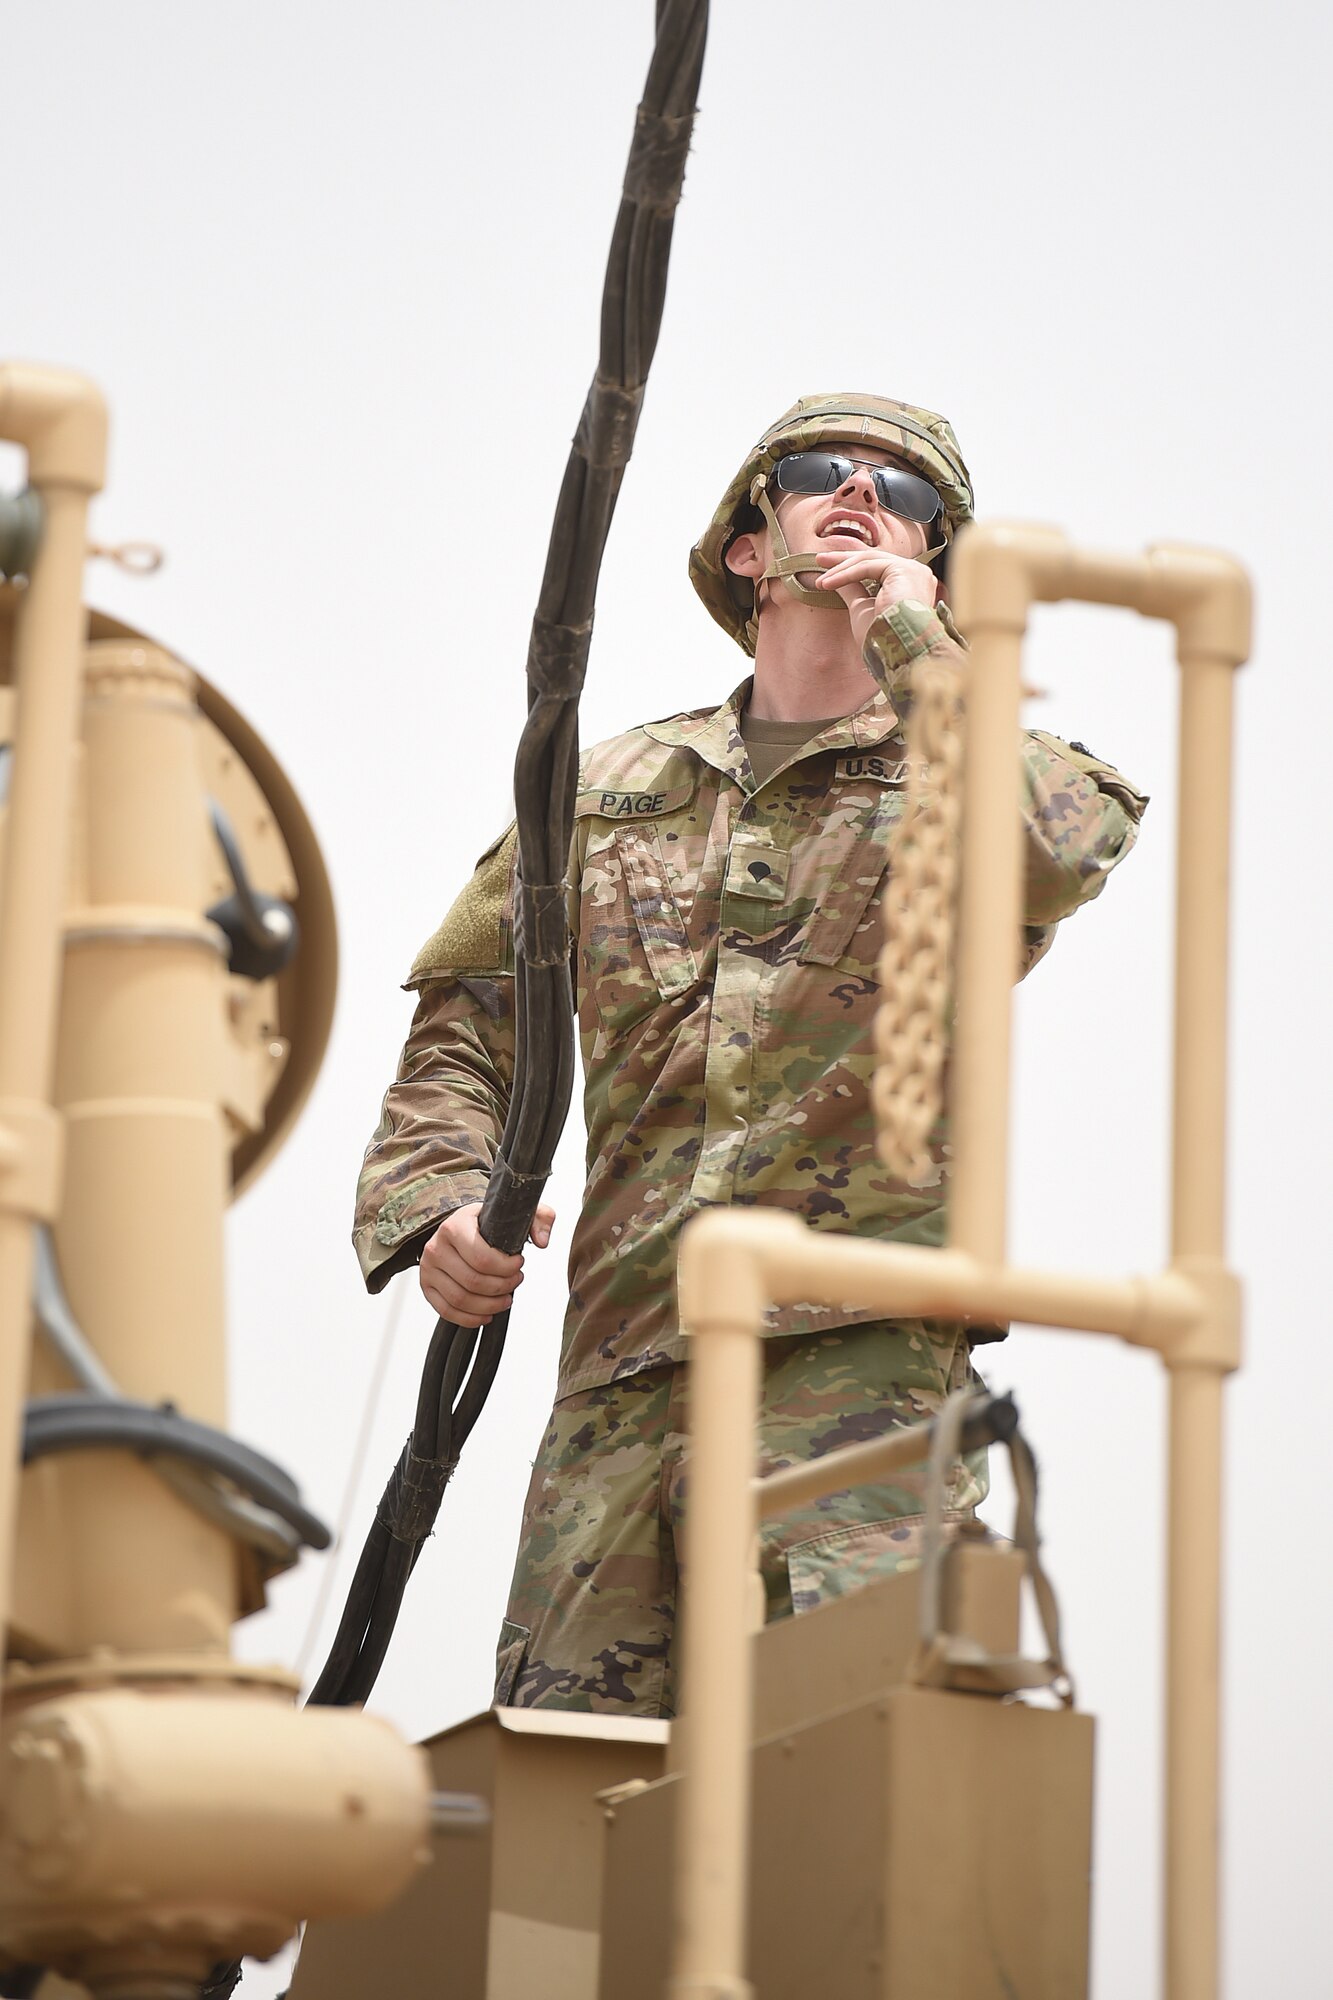 U.S. Army soldier stands on top of a large truck